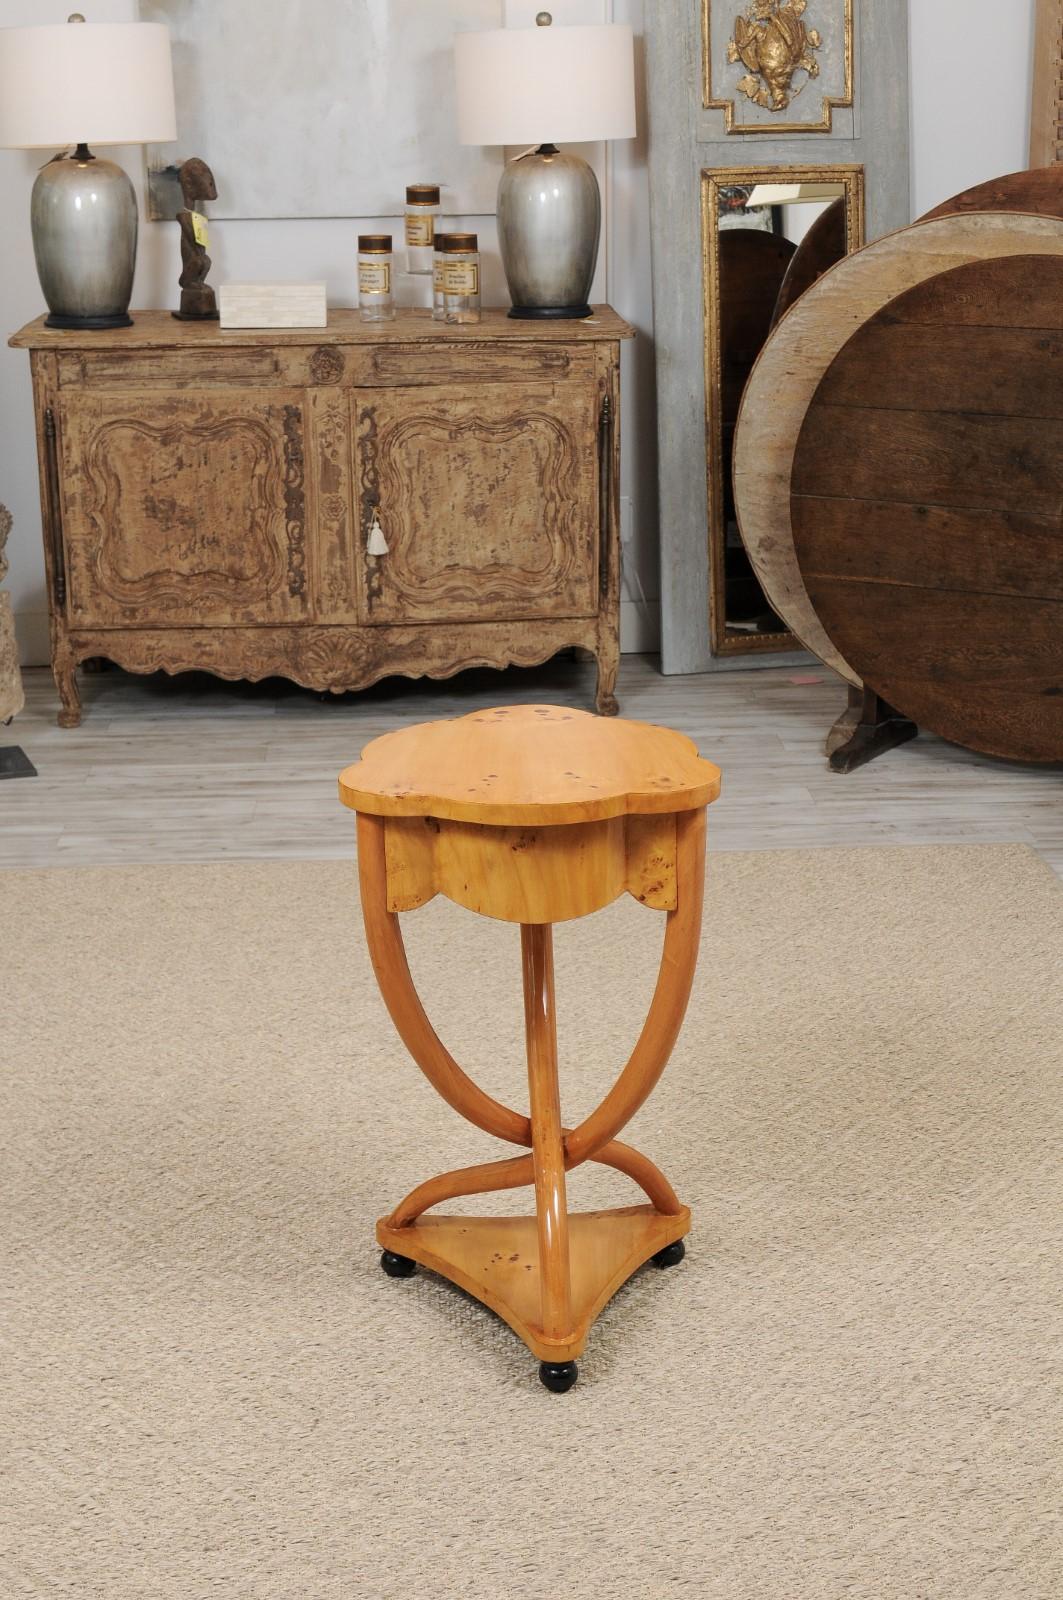 An Italian vintage burl wood guéridon side table with clover-shaped top, single serpentine drawer, intertwined base with lower shelf and ebonized wooden feet from the first half of the 20th century. The perfect sized side table in a graceful and